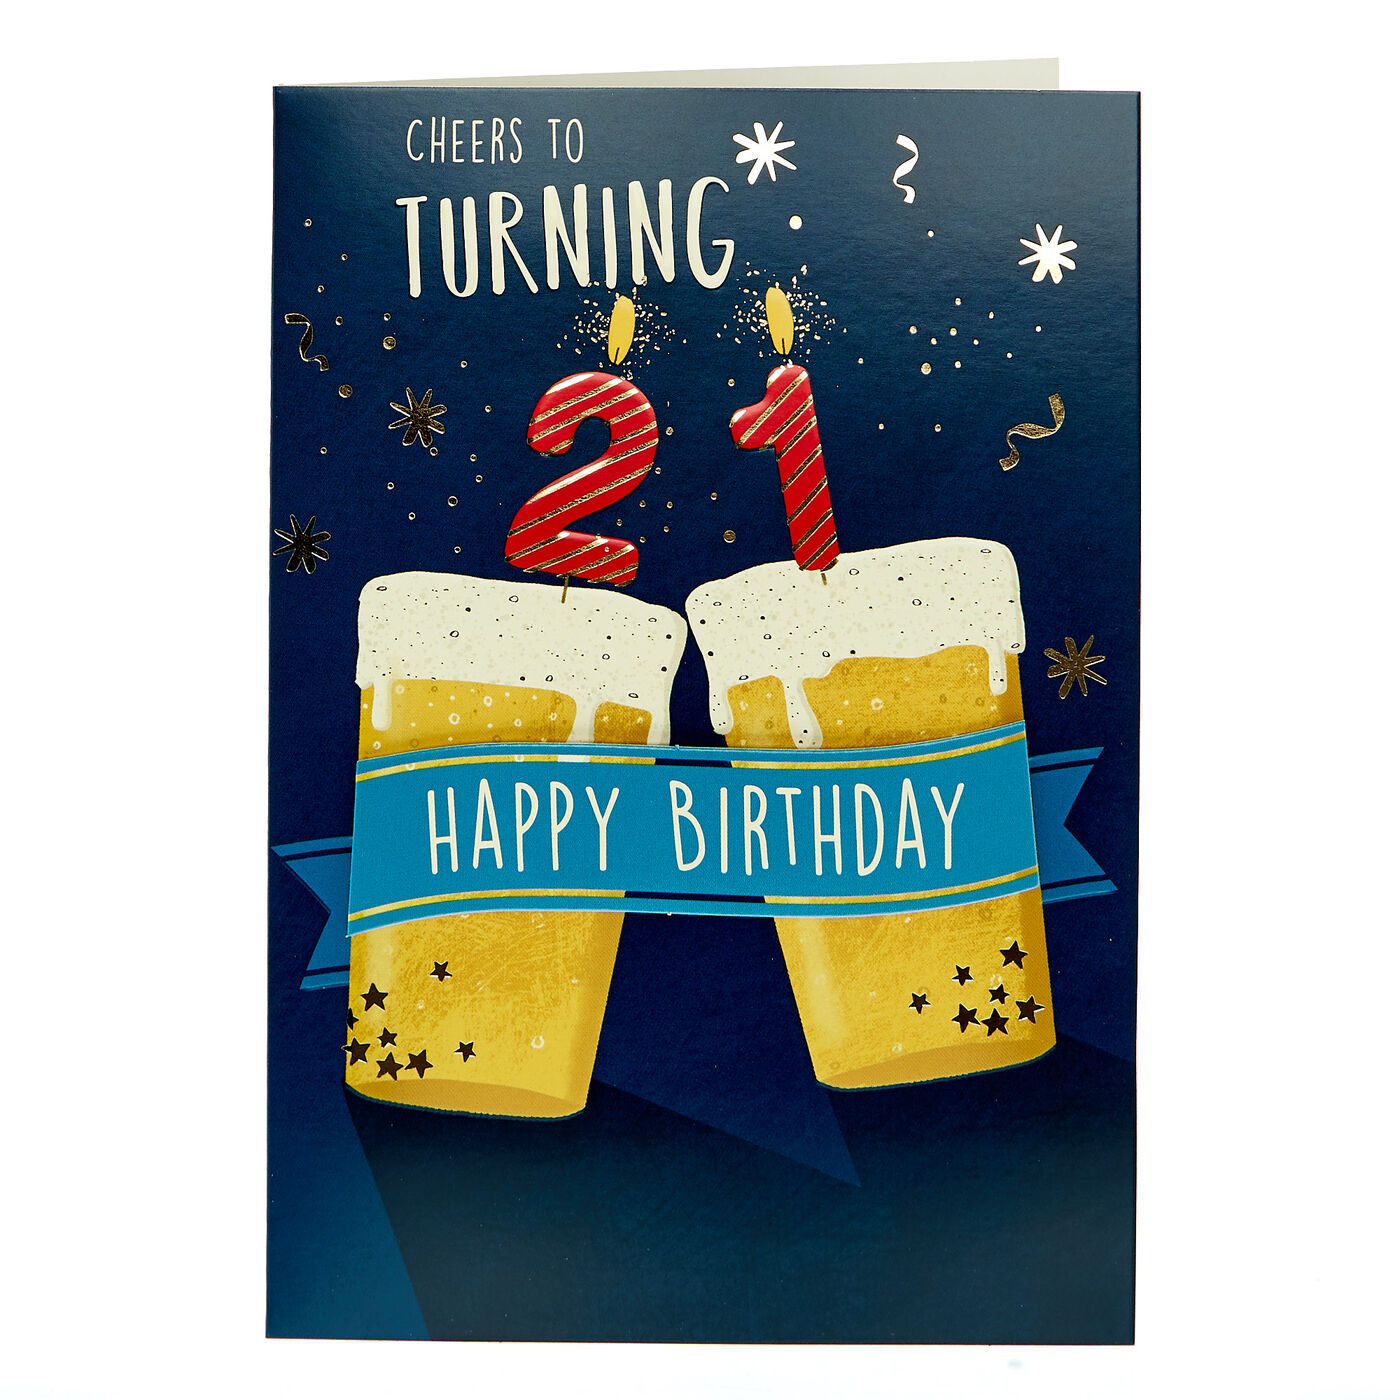 Buy 21st Birthday Card - Cheers to Turning 21 for GBP 0.99 | Card ...